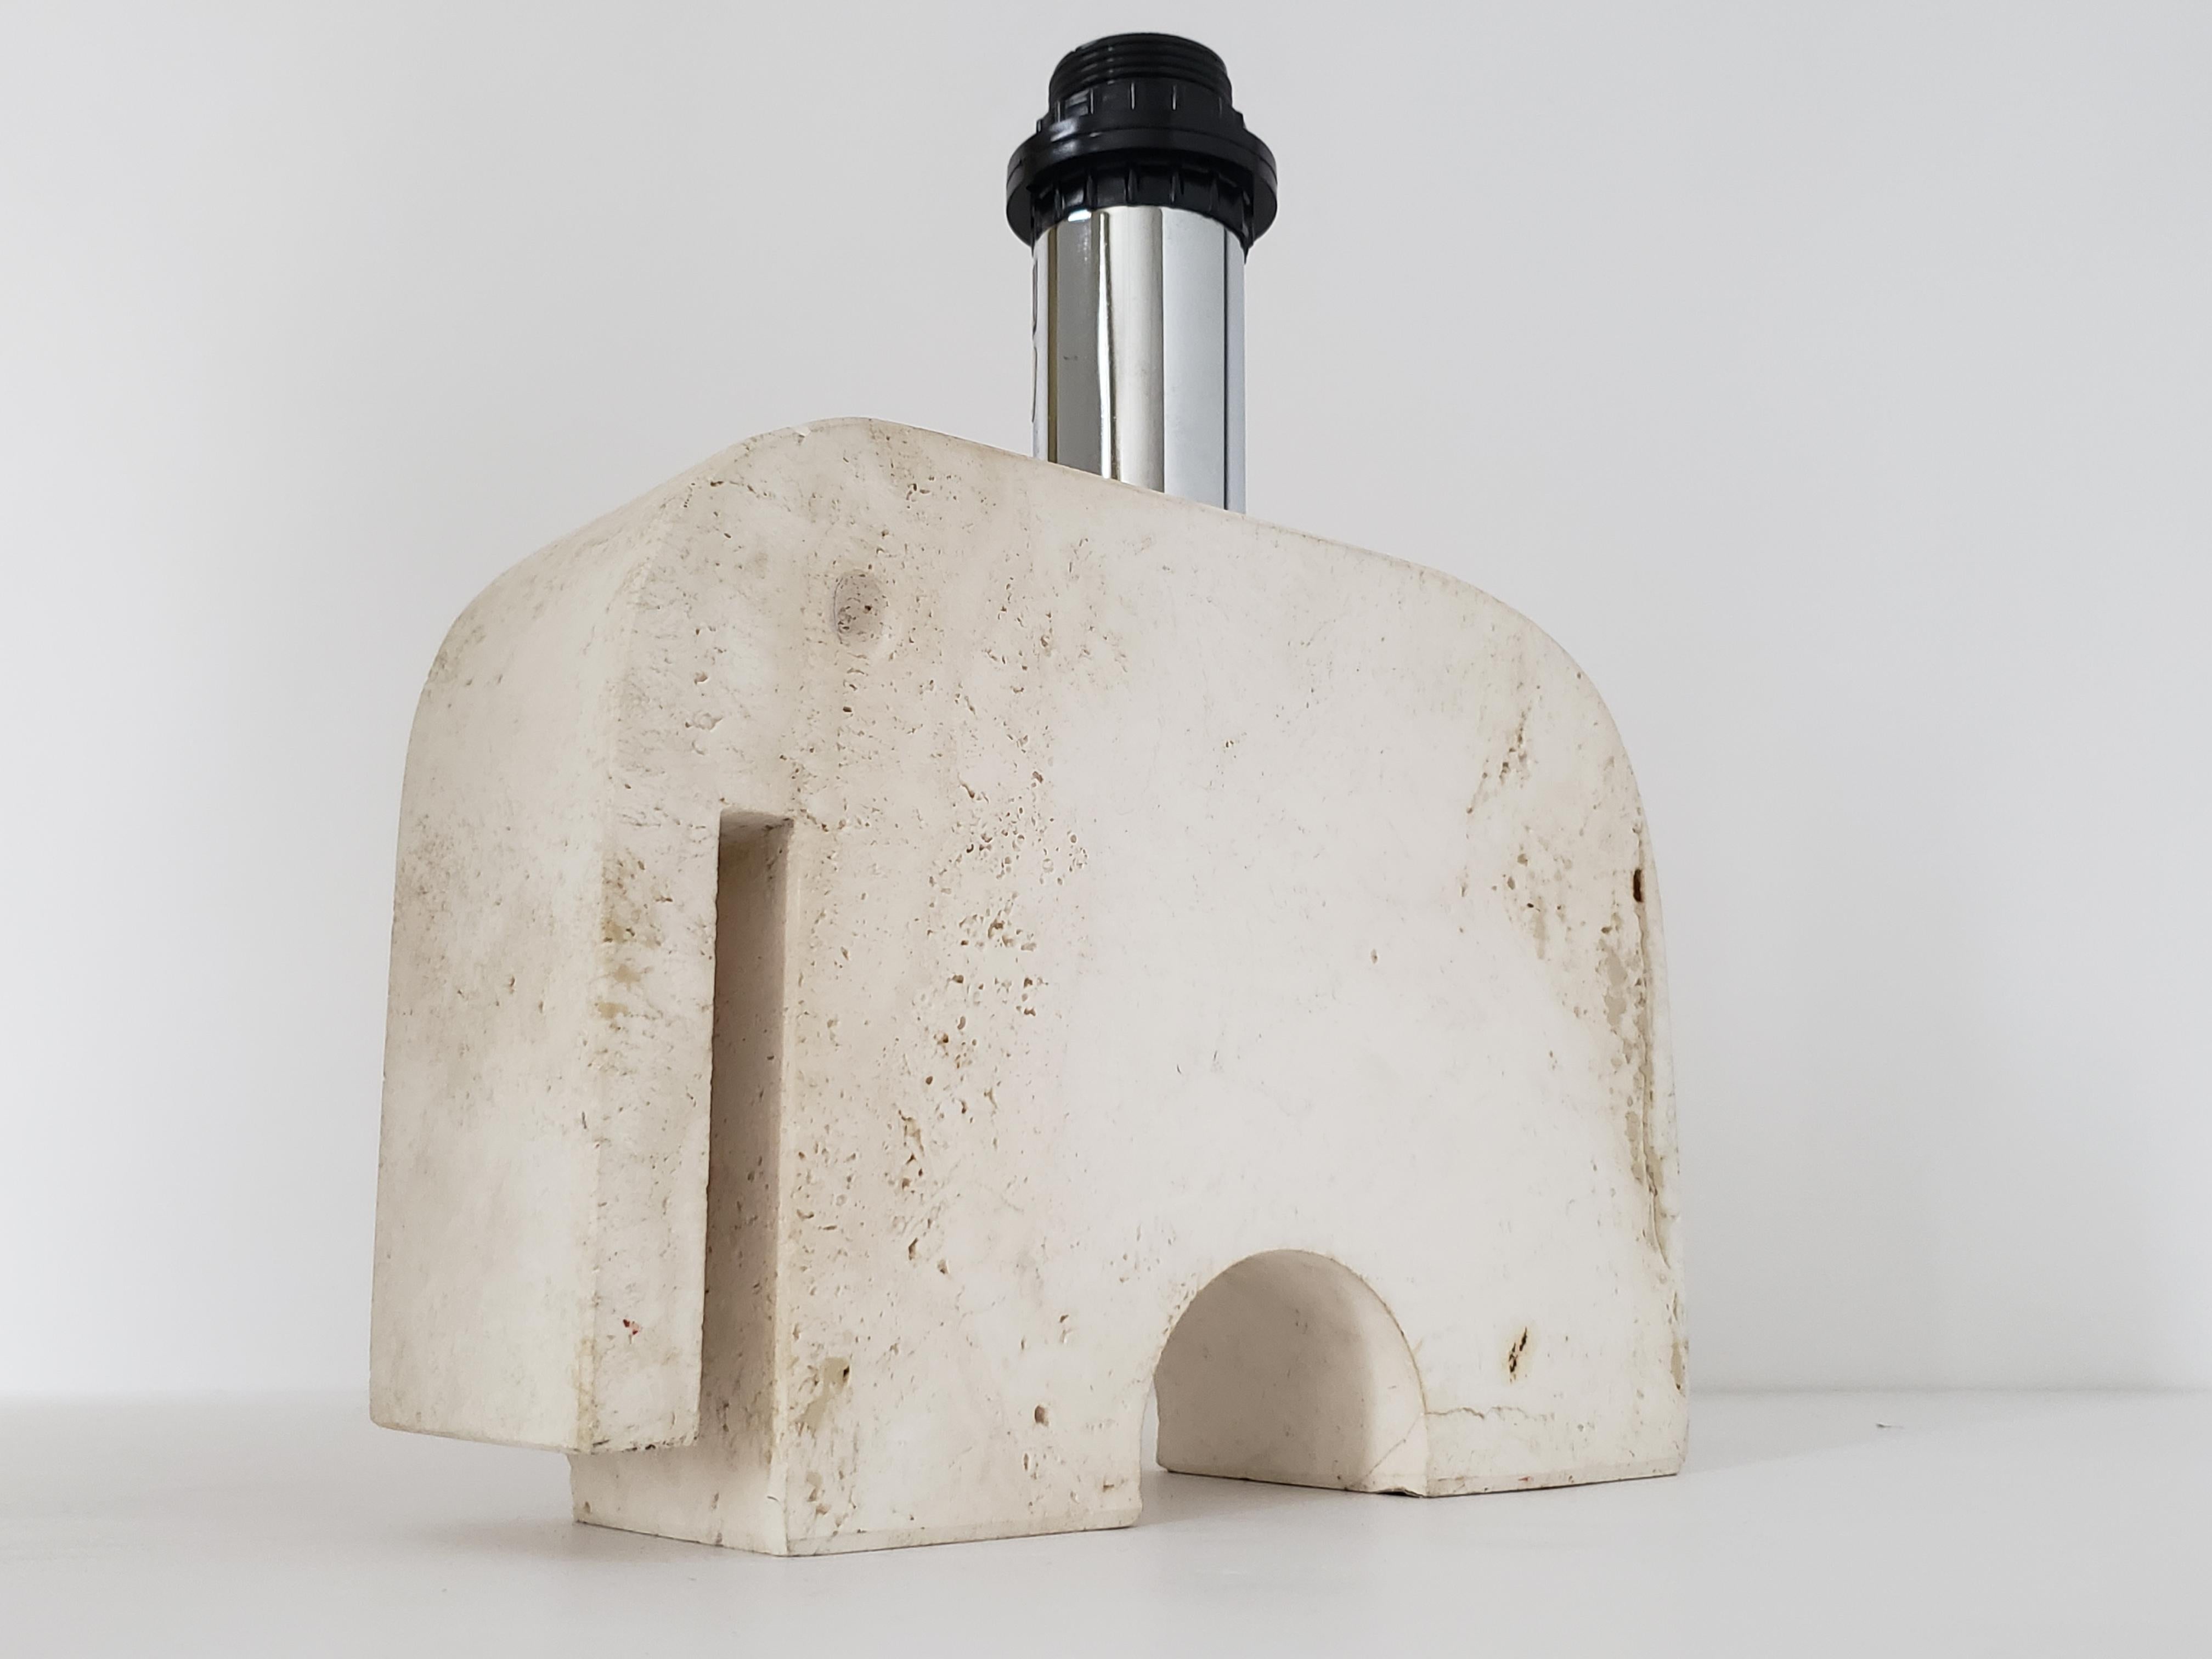 Rare, iconic travertine table lamp from Fratelli Manelli. 

E27 socket rated at 100 watt. 

Original manufacturer label.